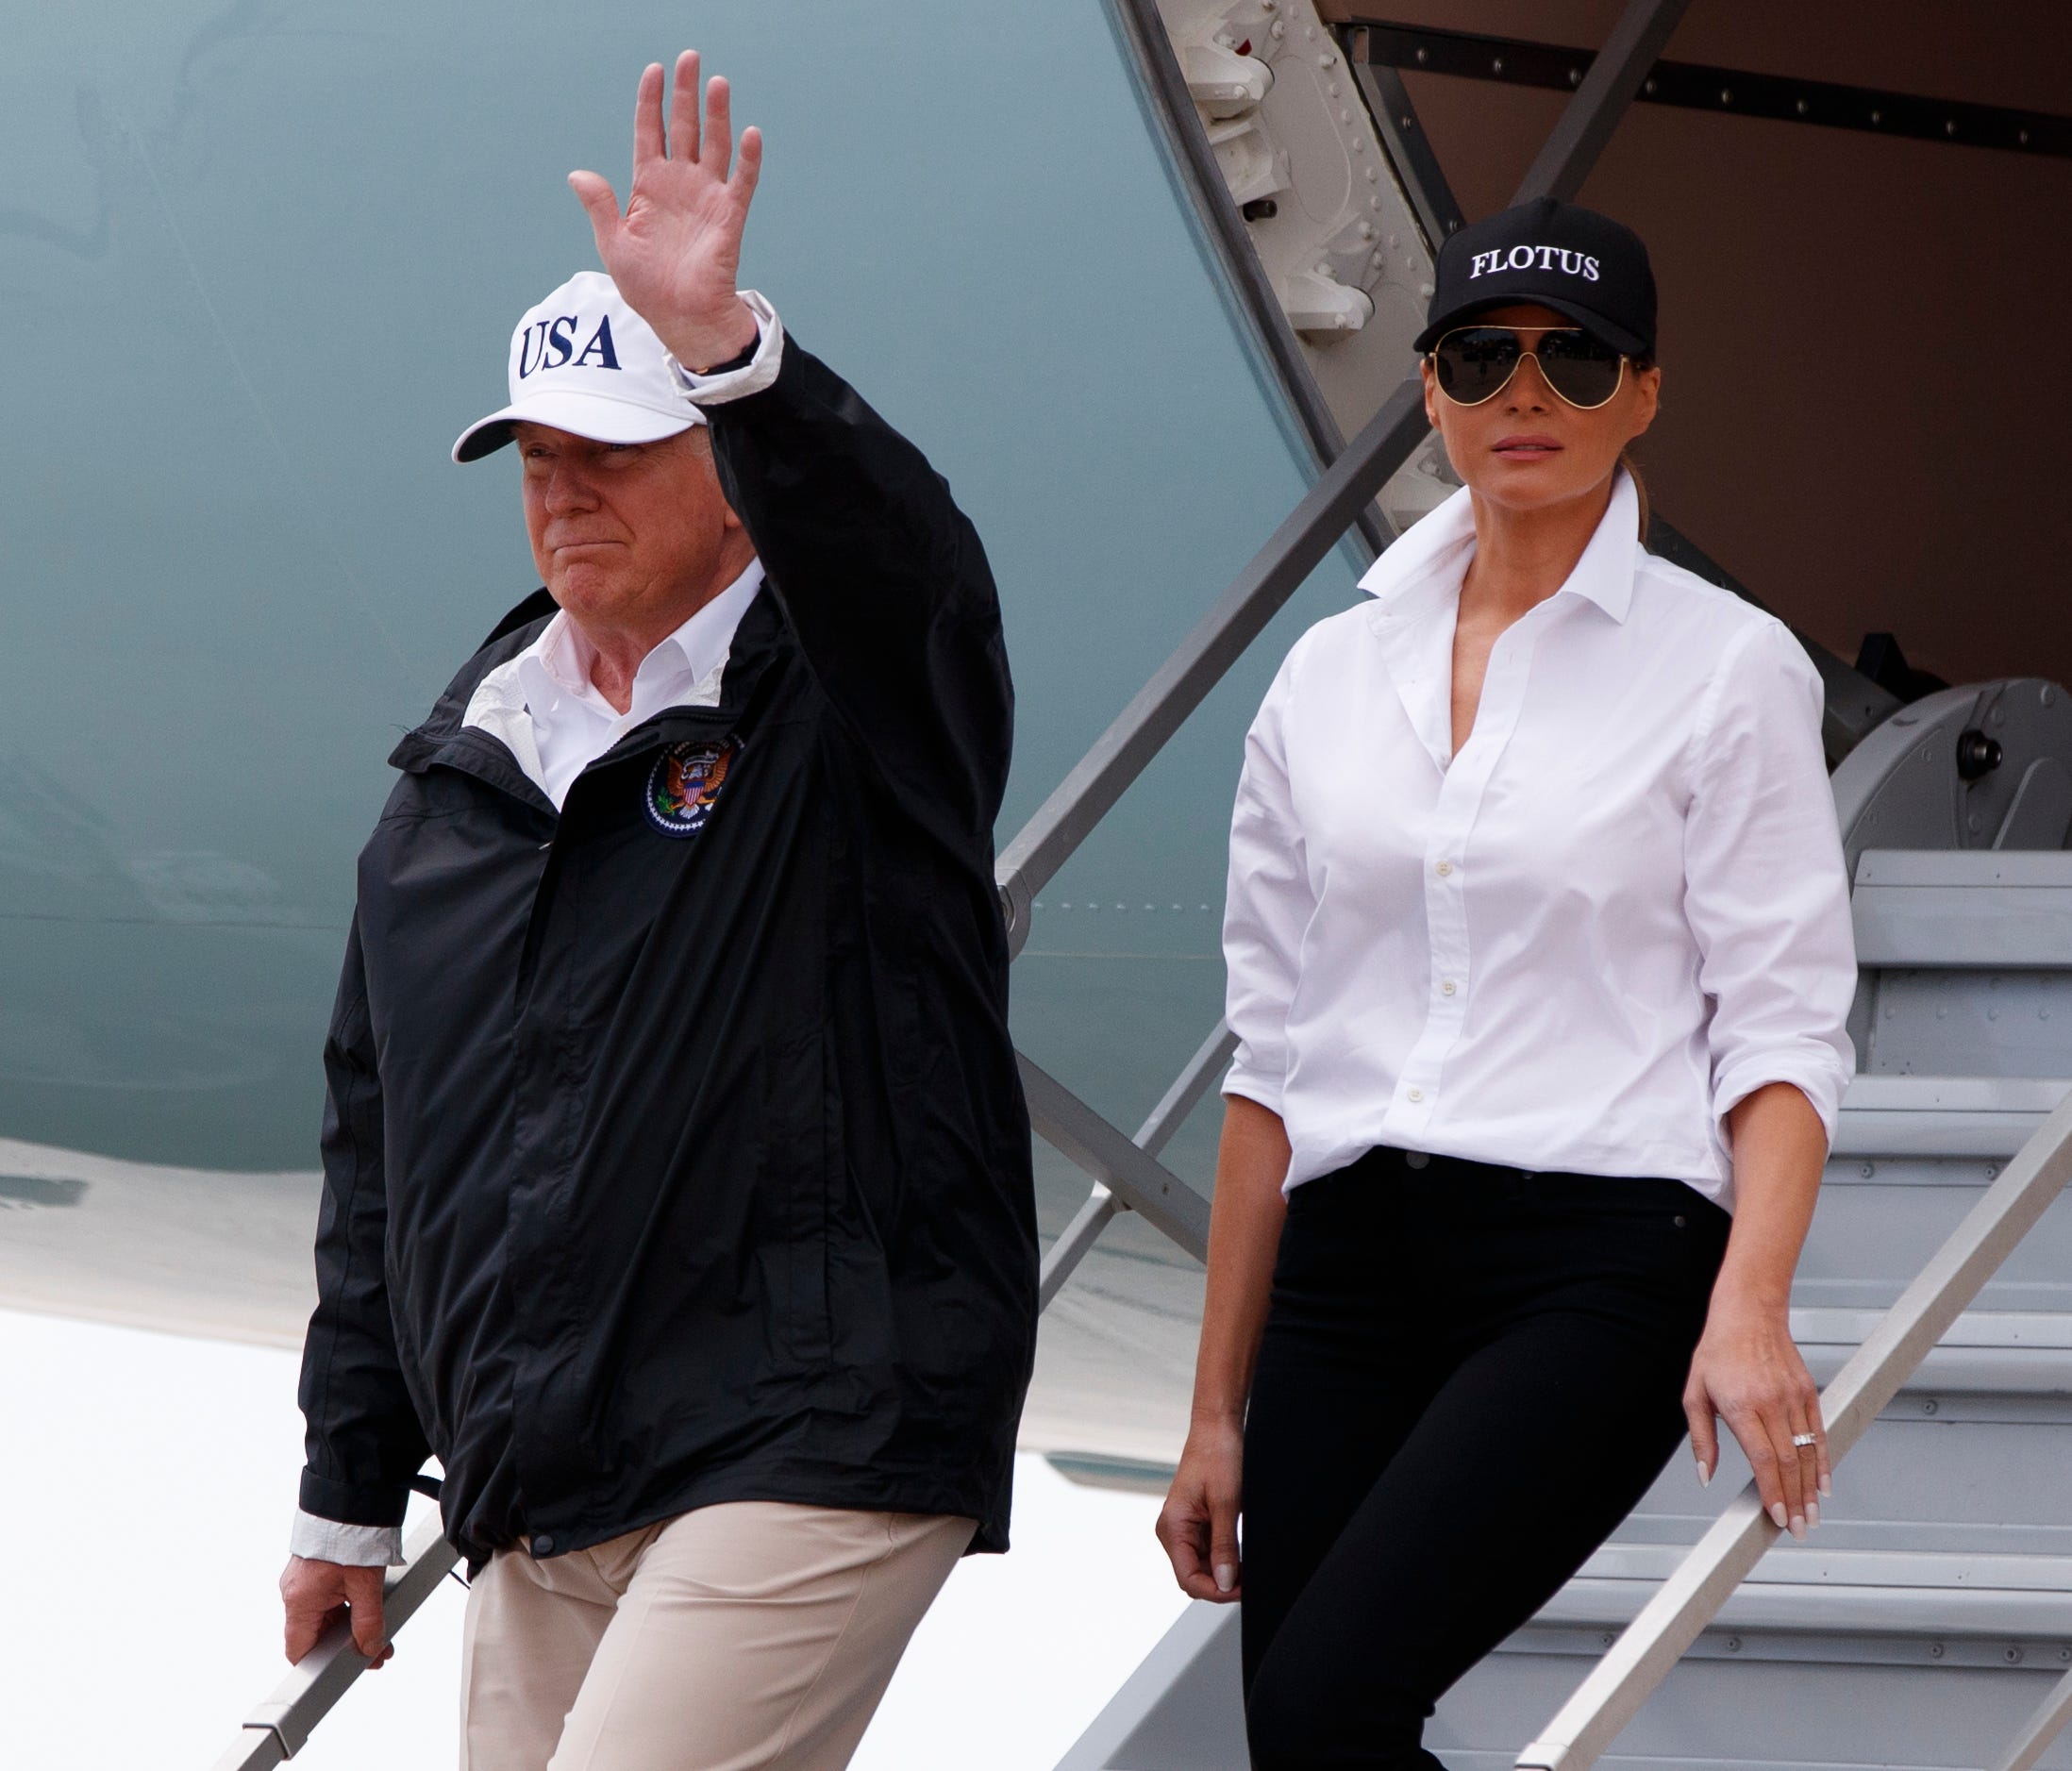 President Trump, accompanied by first lady Melania Trump, waves as they arrive on Air Force One at Corpus Christi International Airport Tuesday.